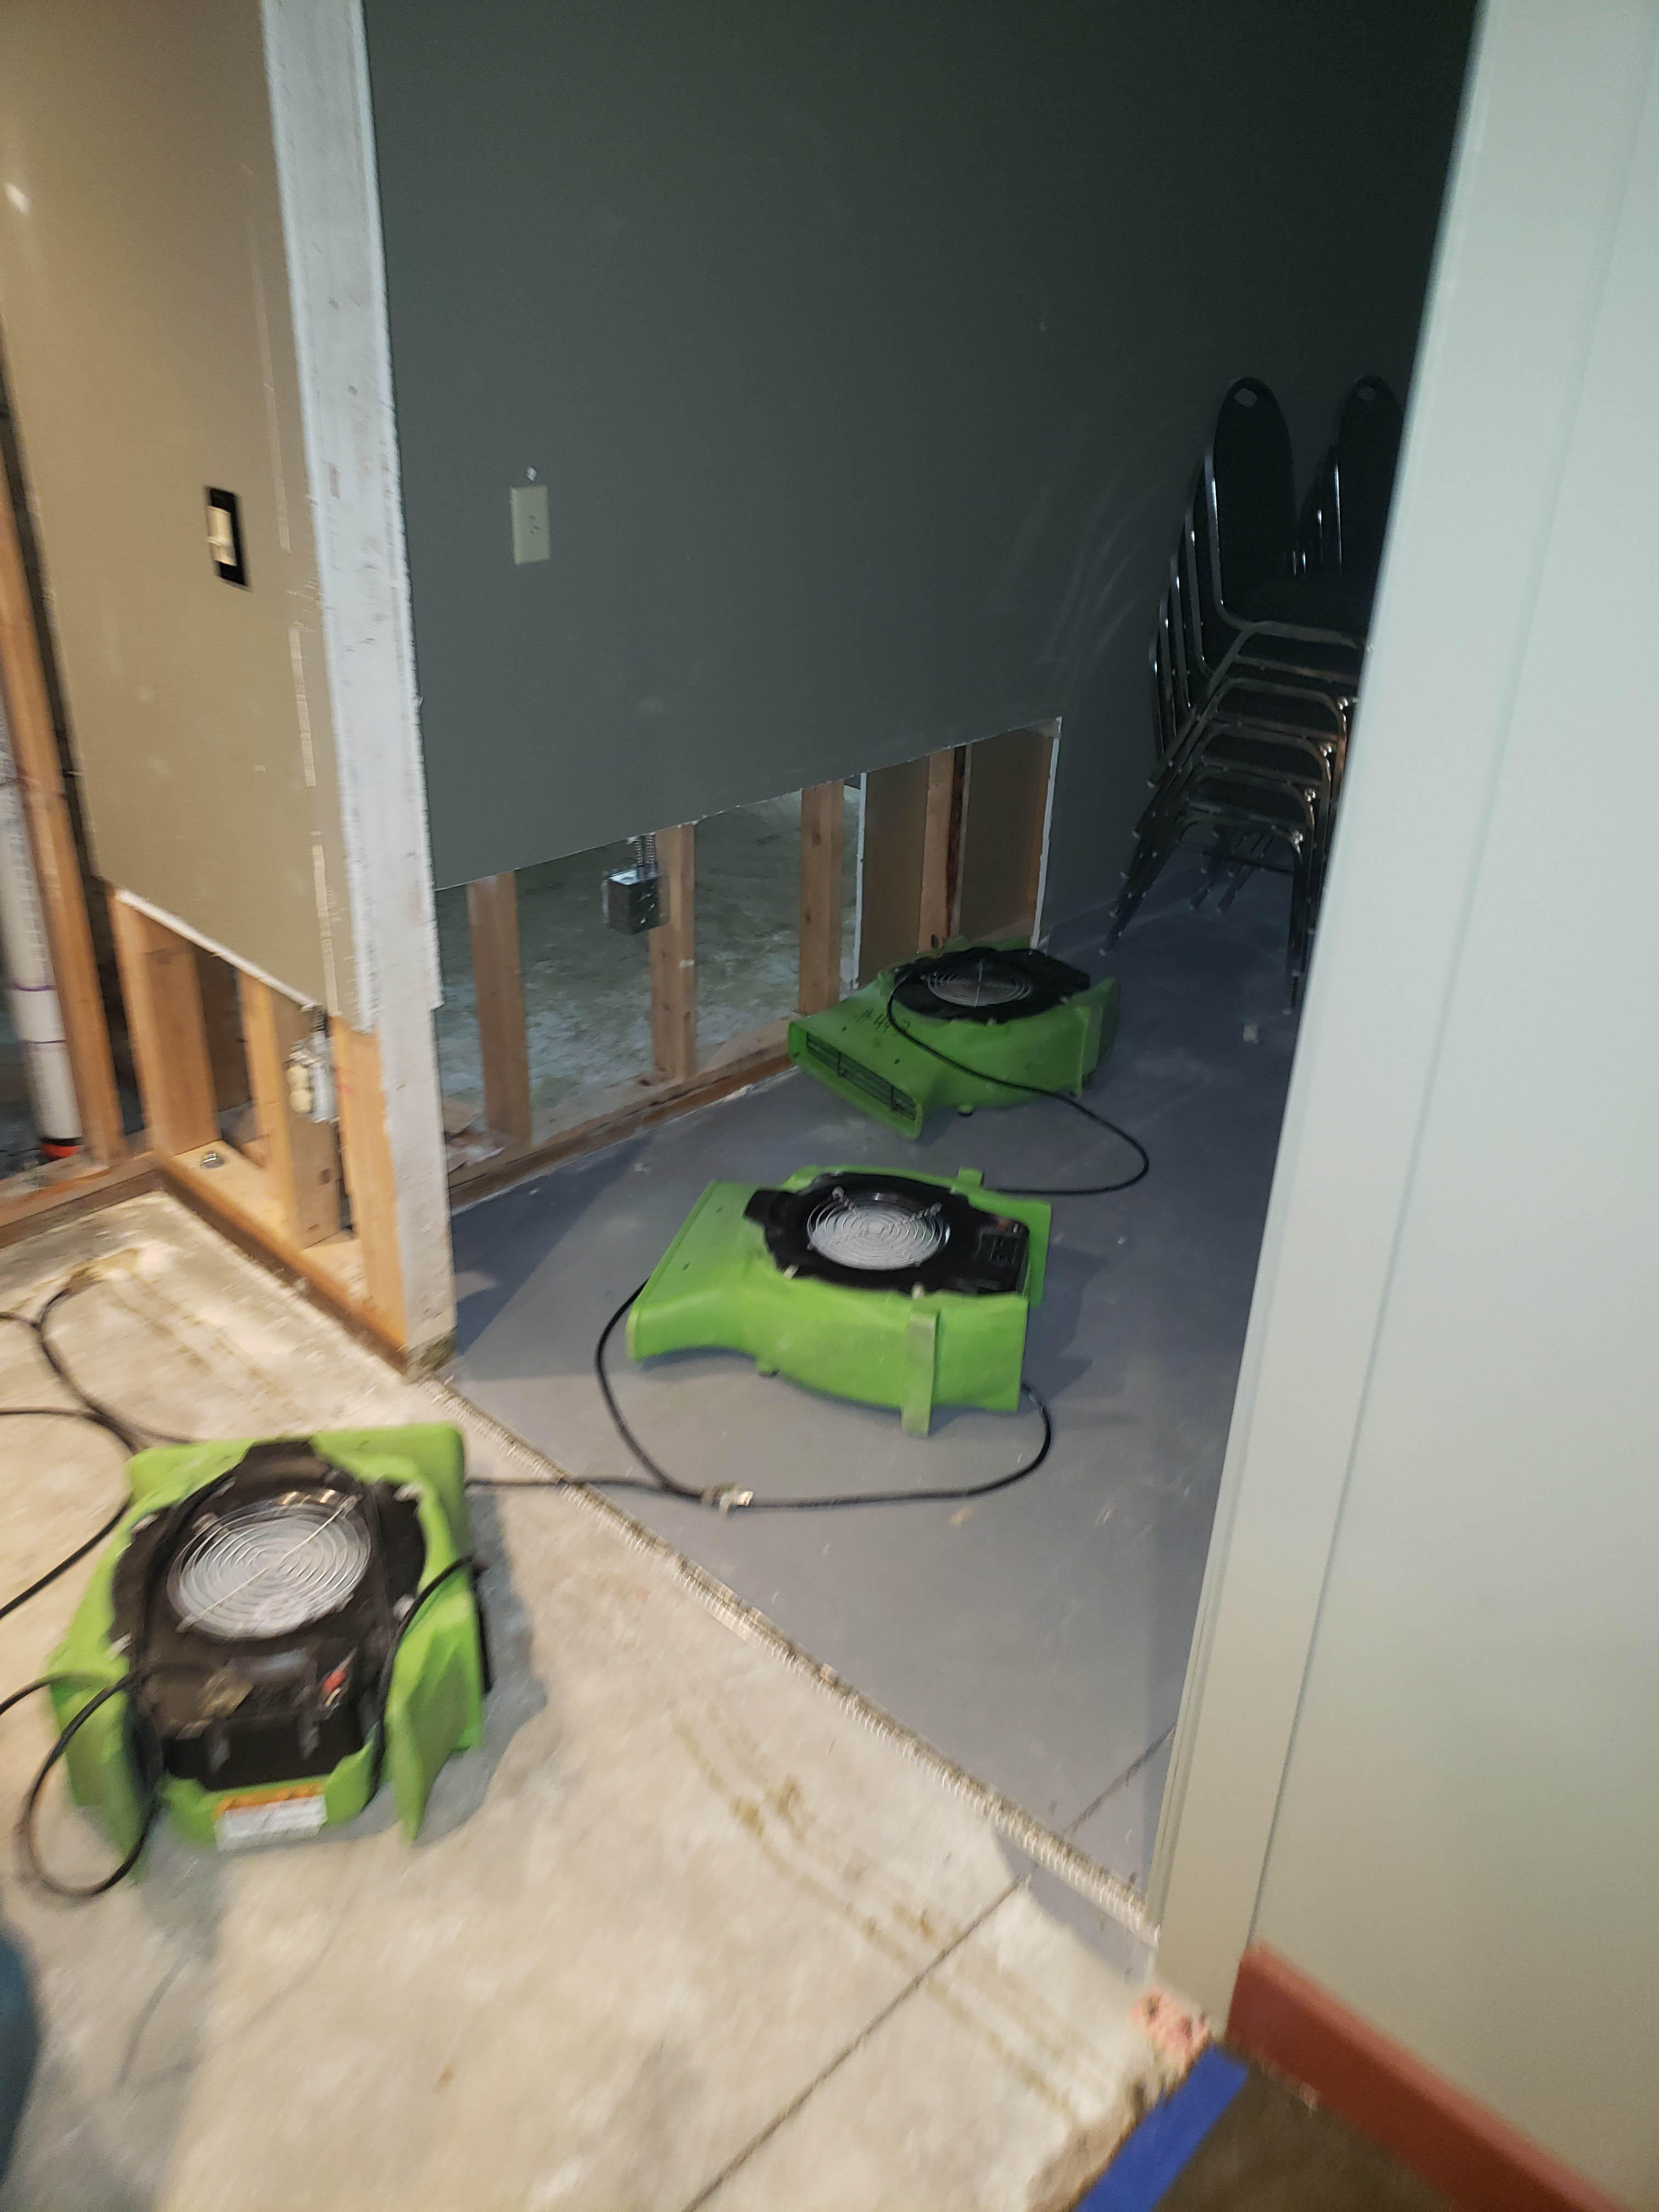 Water can cause major damage to your Renton home depending on the source. SERVPRO of Renton will properly remove the damage and get the affected area dry.